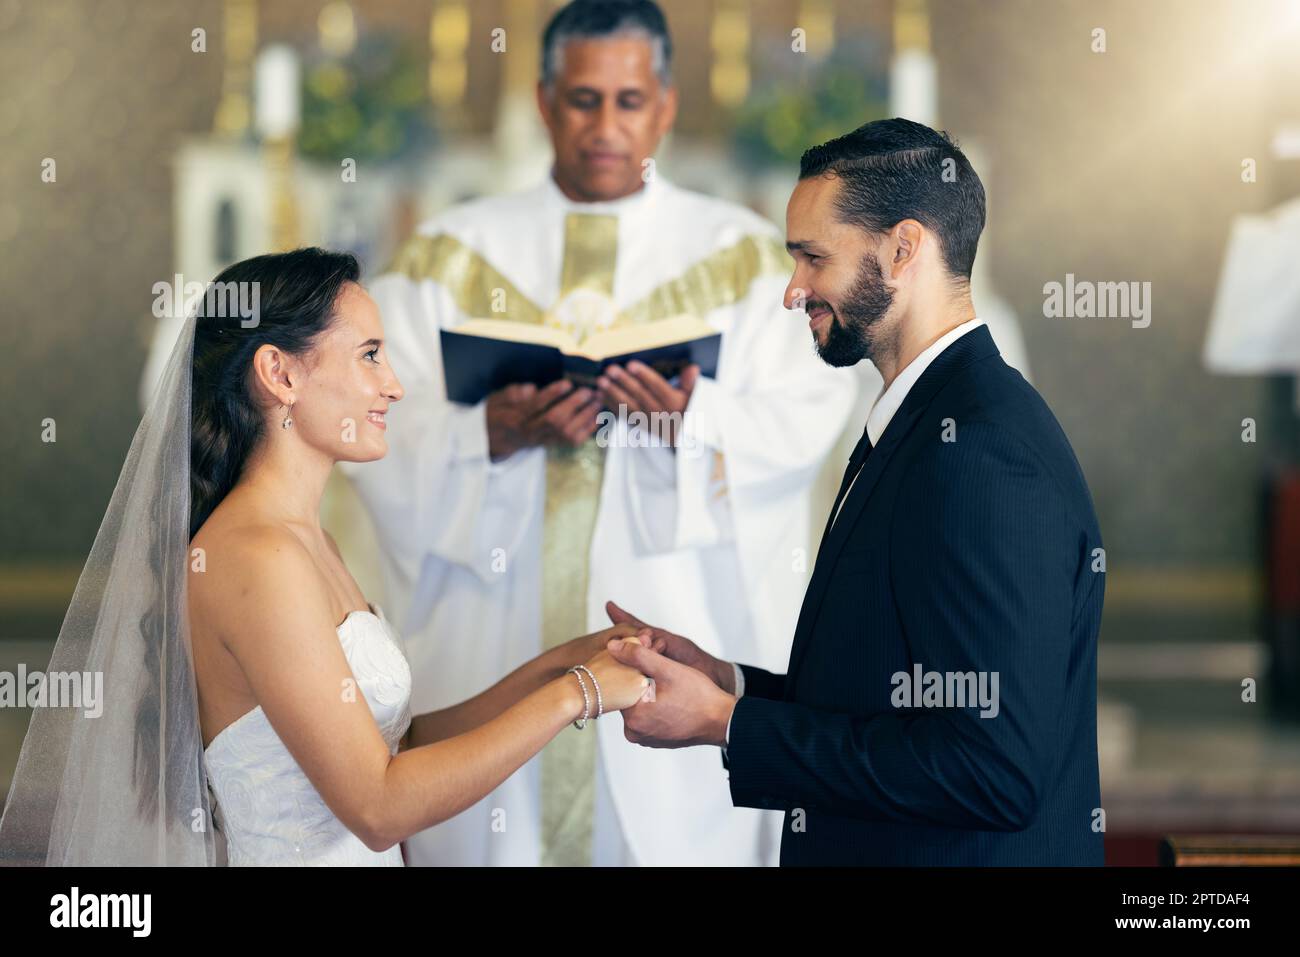 christian marriage vows